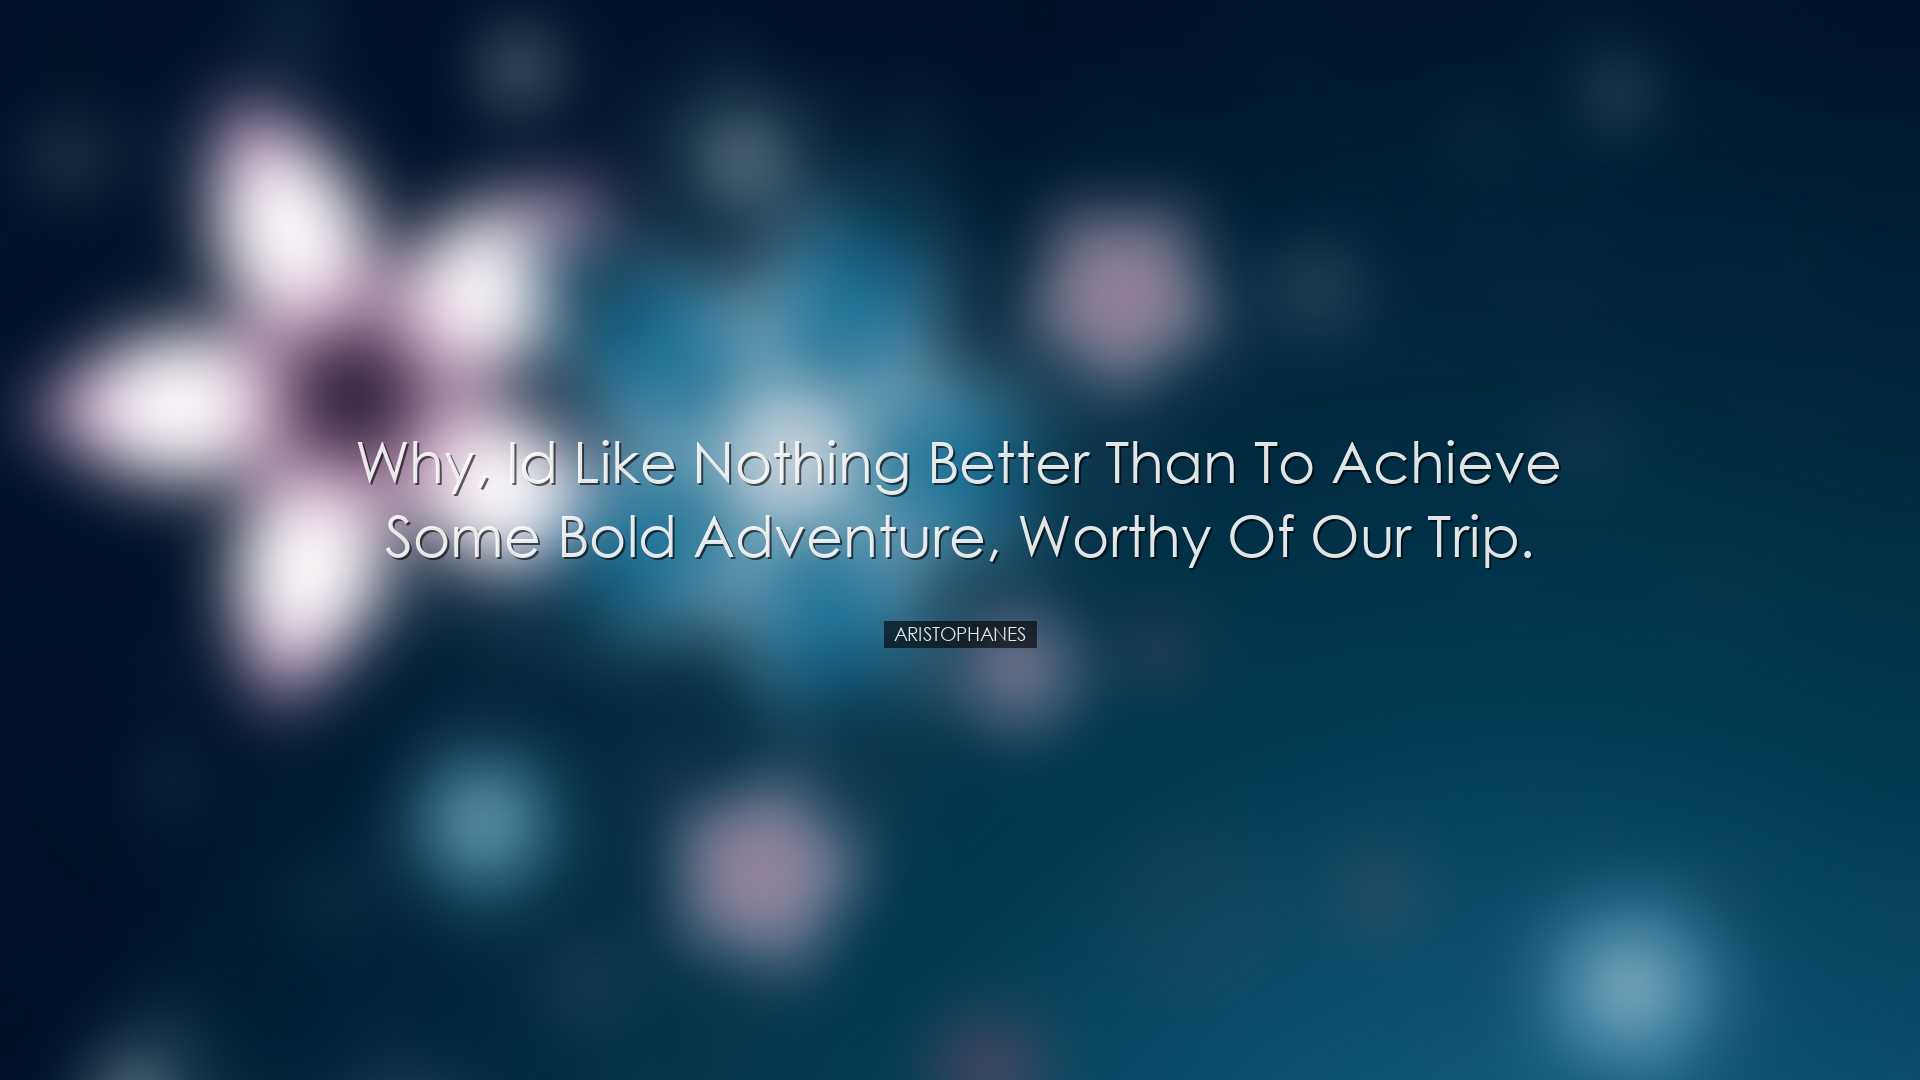 Why, Id like nothing better than to achieve some bold adventure, w